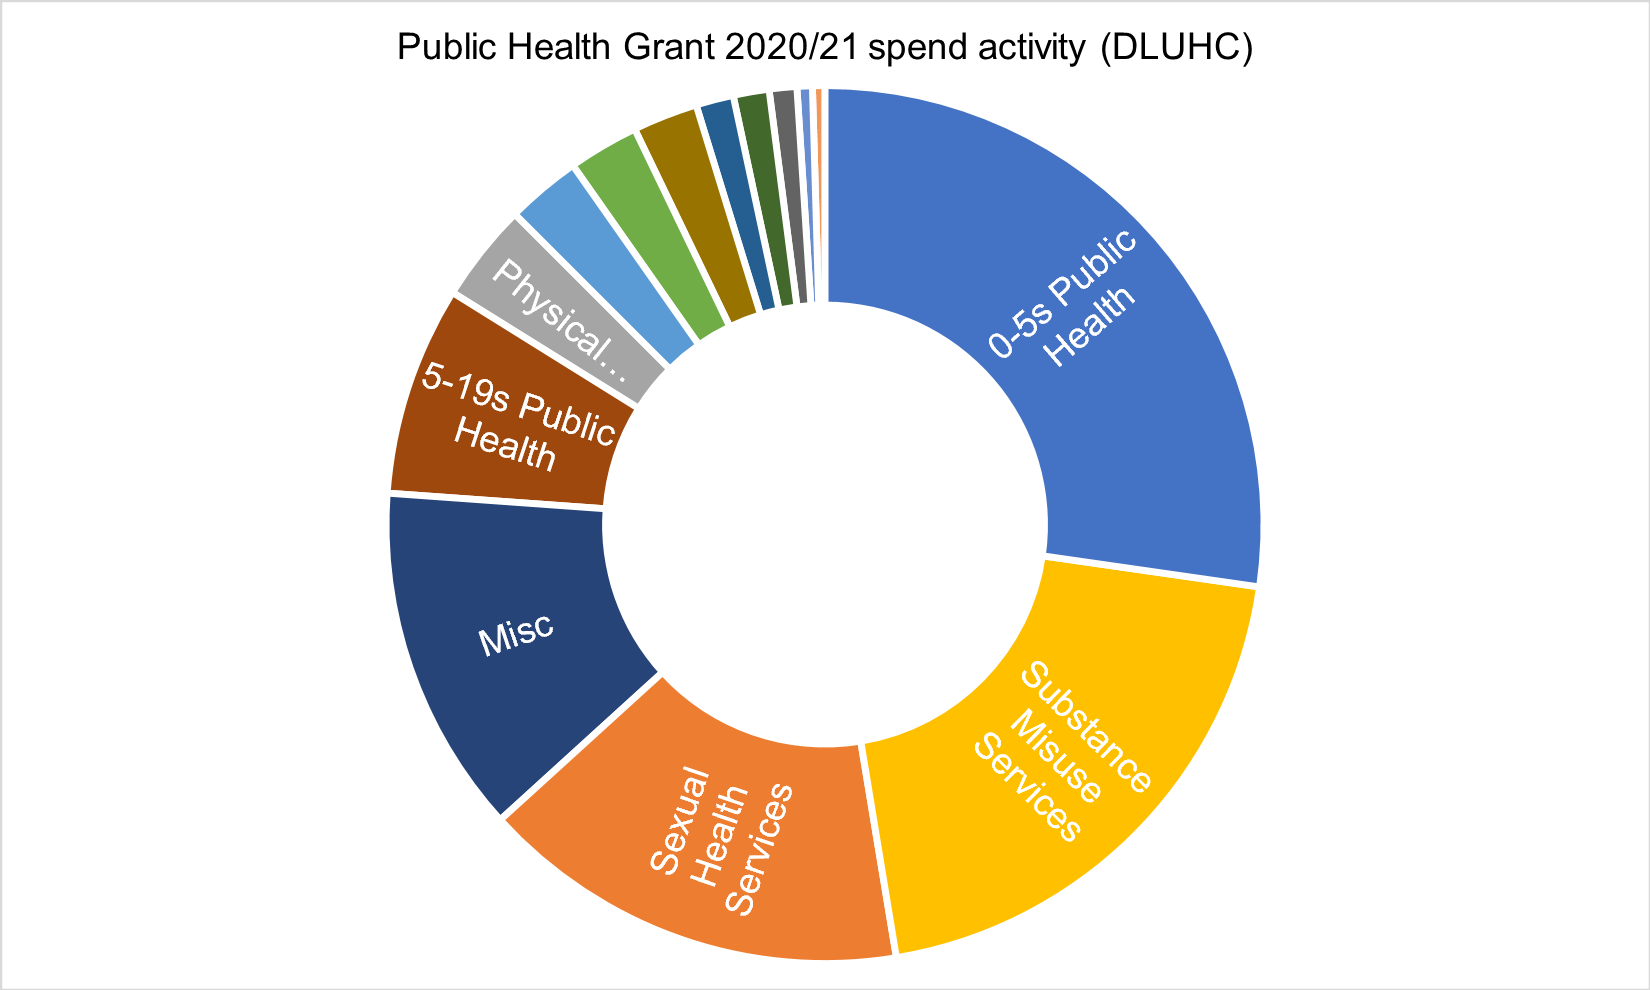 The greatest proportion of spend via the public health grant for 2020-21 is on services for children aged 0-5 (e.g. Health Visiting). The second greatest proportion of public health grant spend is on substance misuse services. Sexual health services accounted for the third largest proportion of spend from the public health grant in 2020/21.